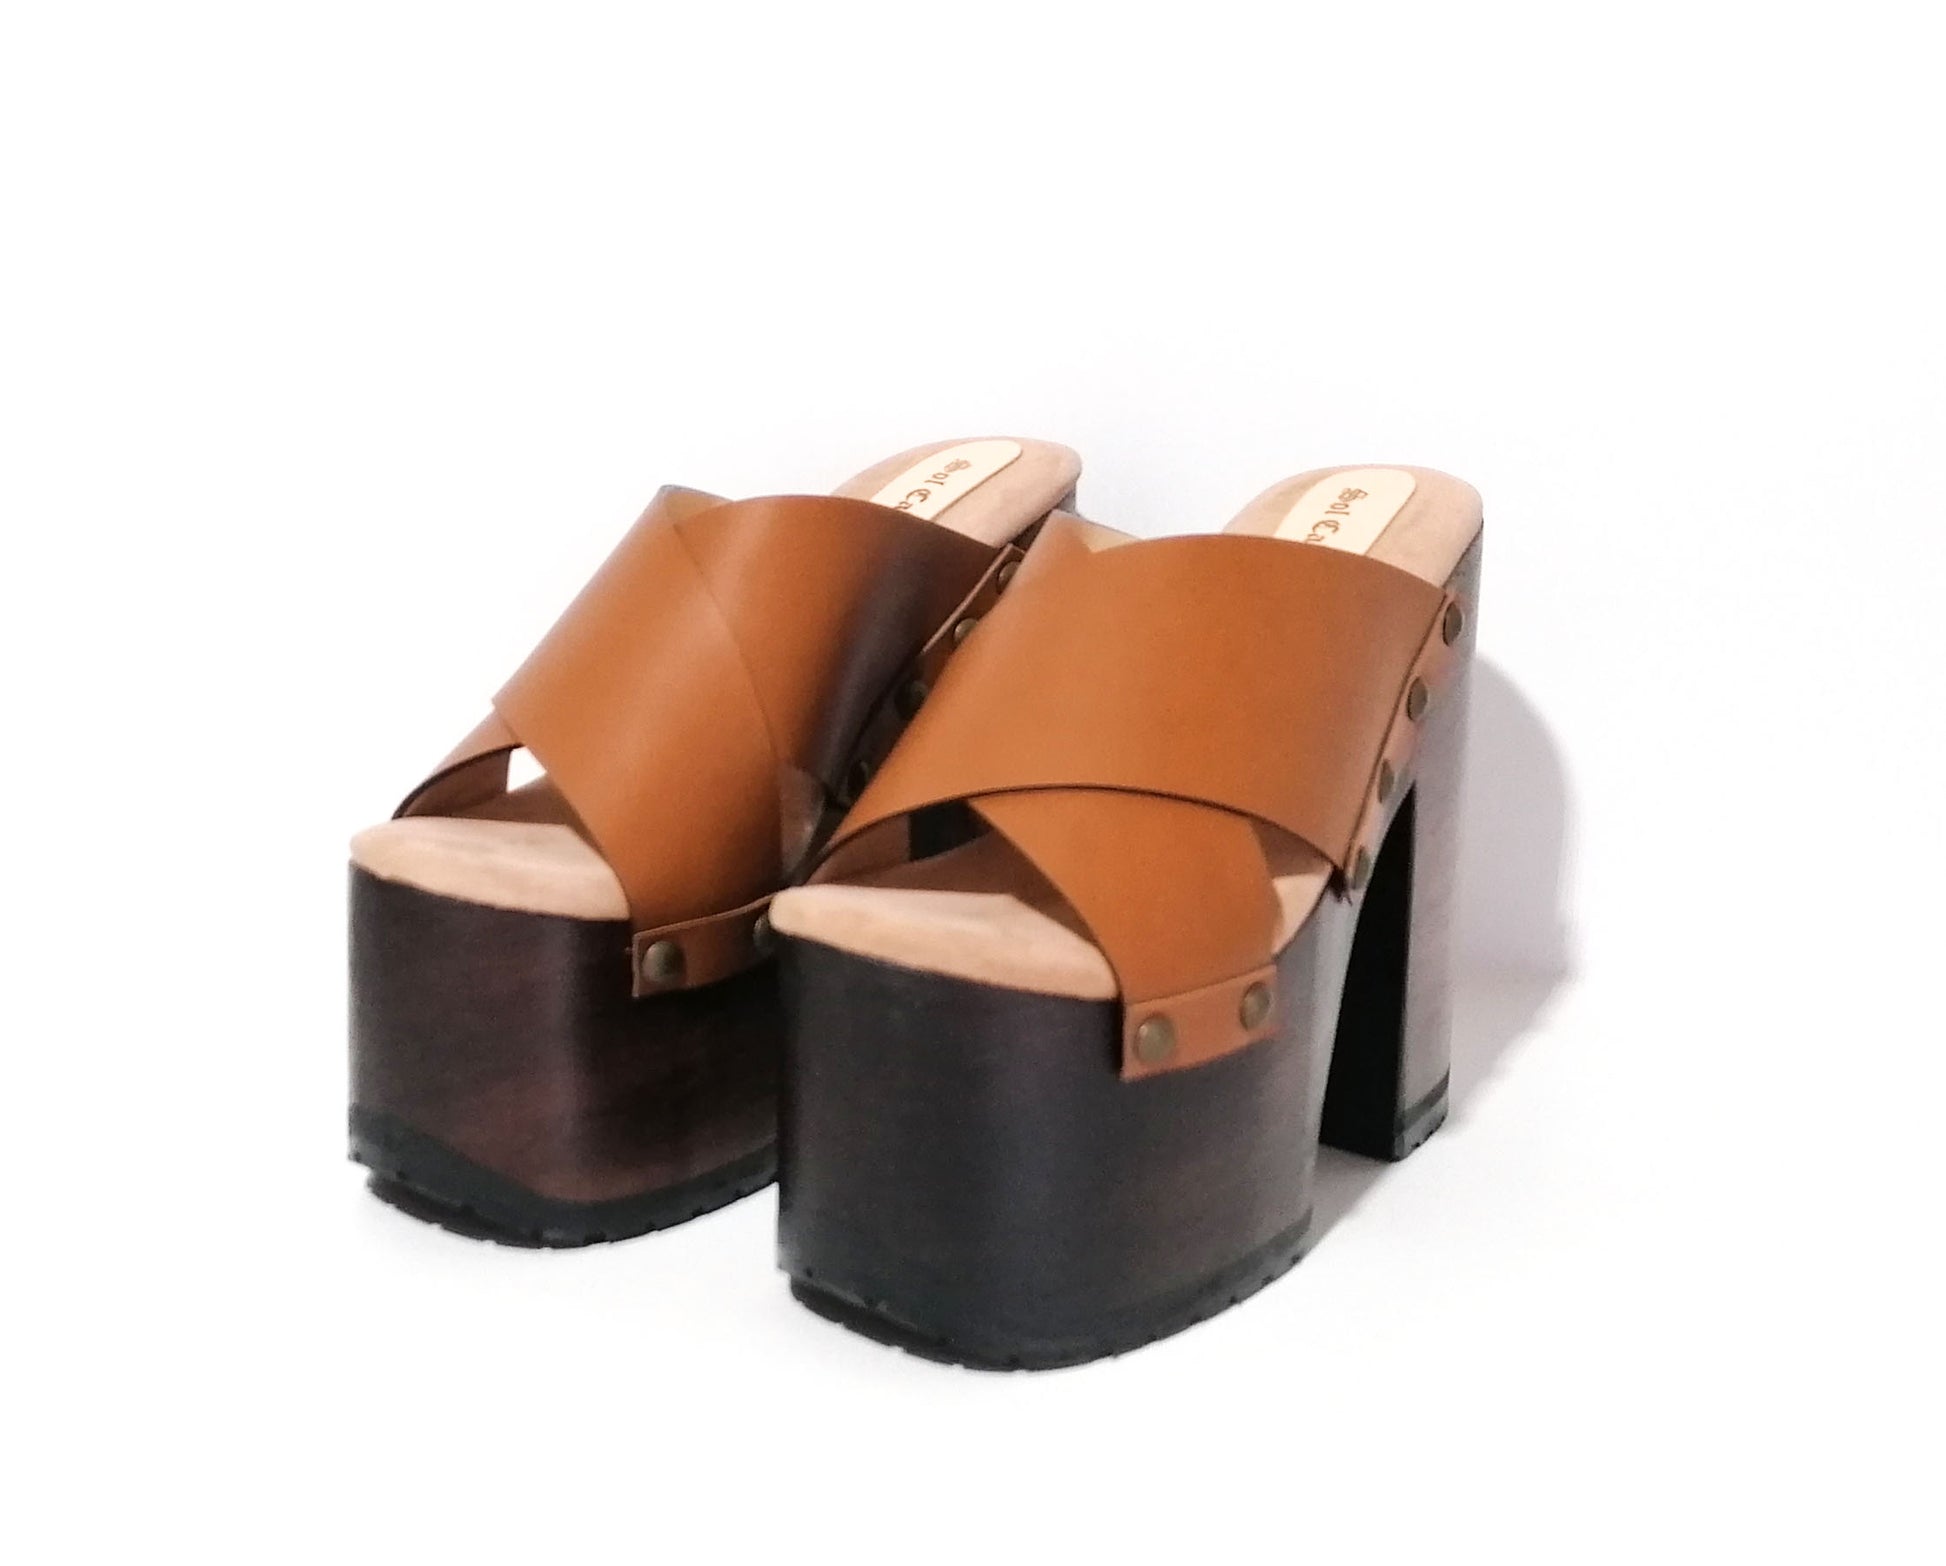 Brown leather clogs with platform and super high heel. Leather mule with super high wooden heel. Vintage 70's style leather clogs. Vintage style super high heel sandal. Sizes 34 to 47. High quality leather shoes handmade by sol Caleyo. Sustainable fashion.